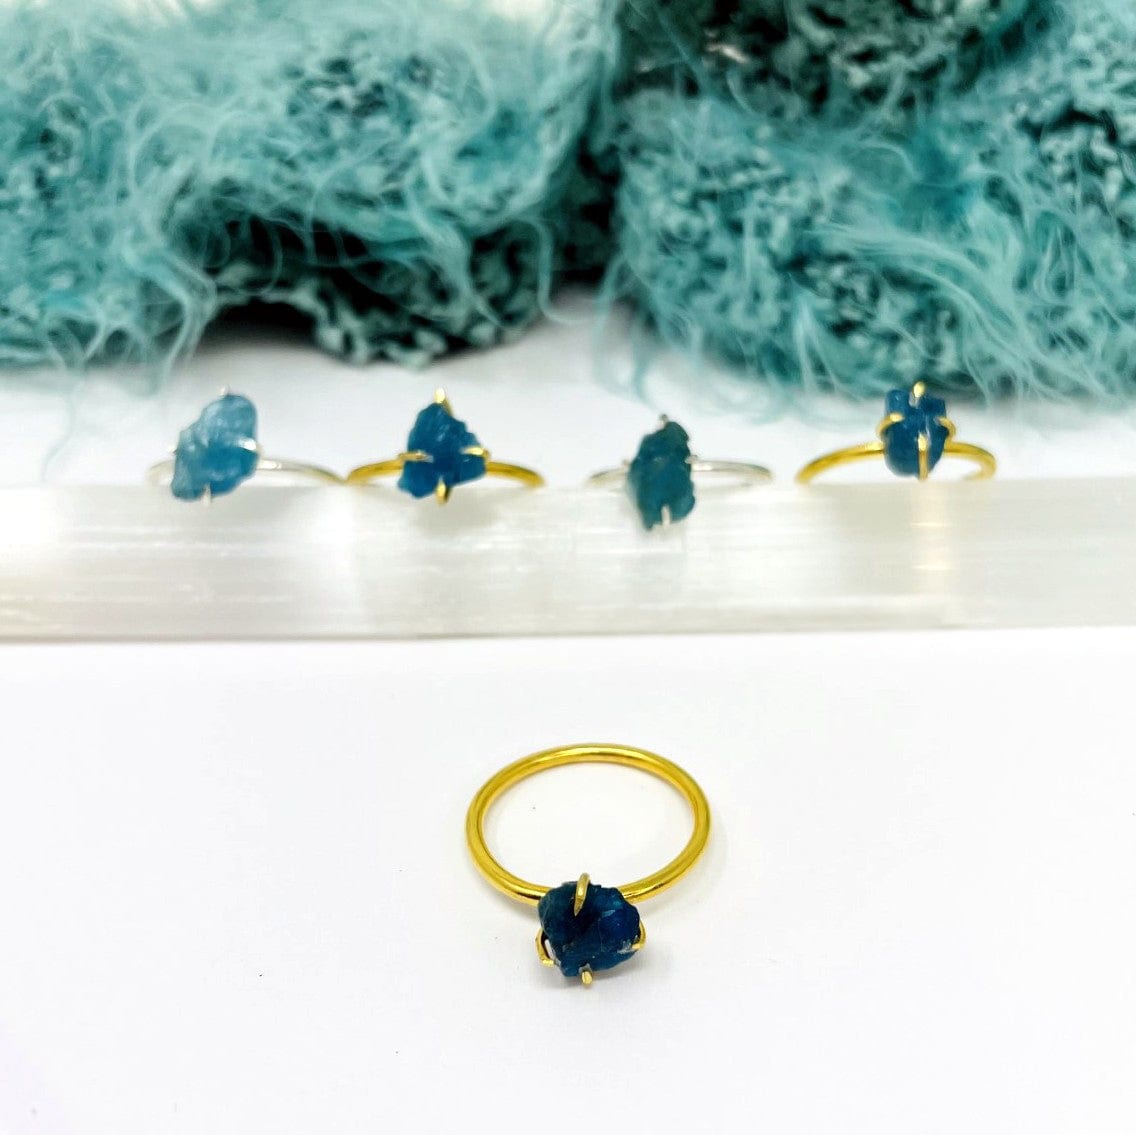 Gemstone Ring  in Apatite Stone  Gold or Silver in backgroundr